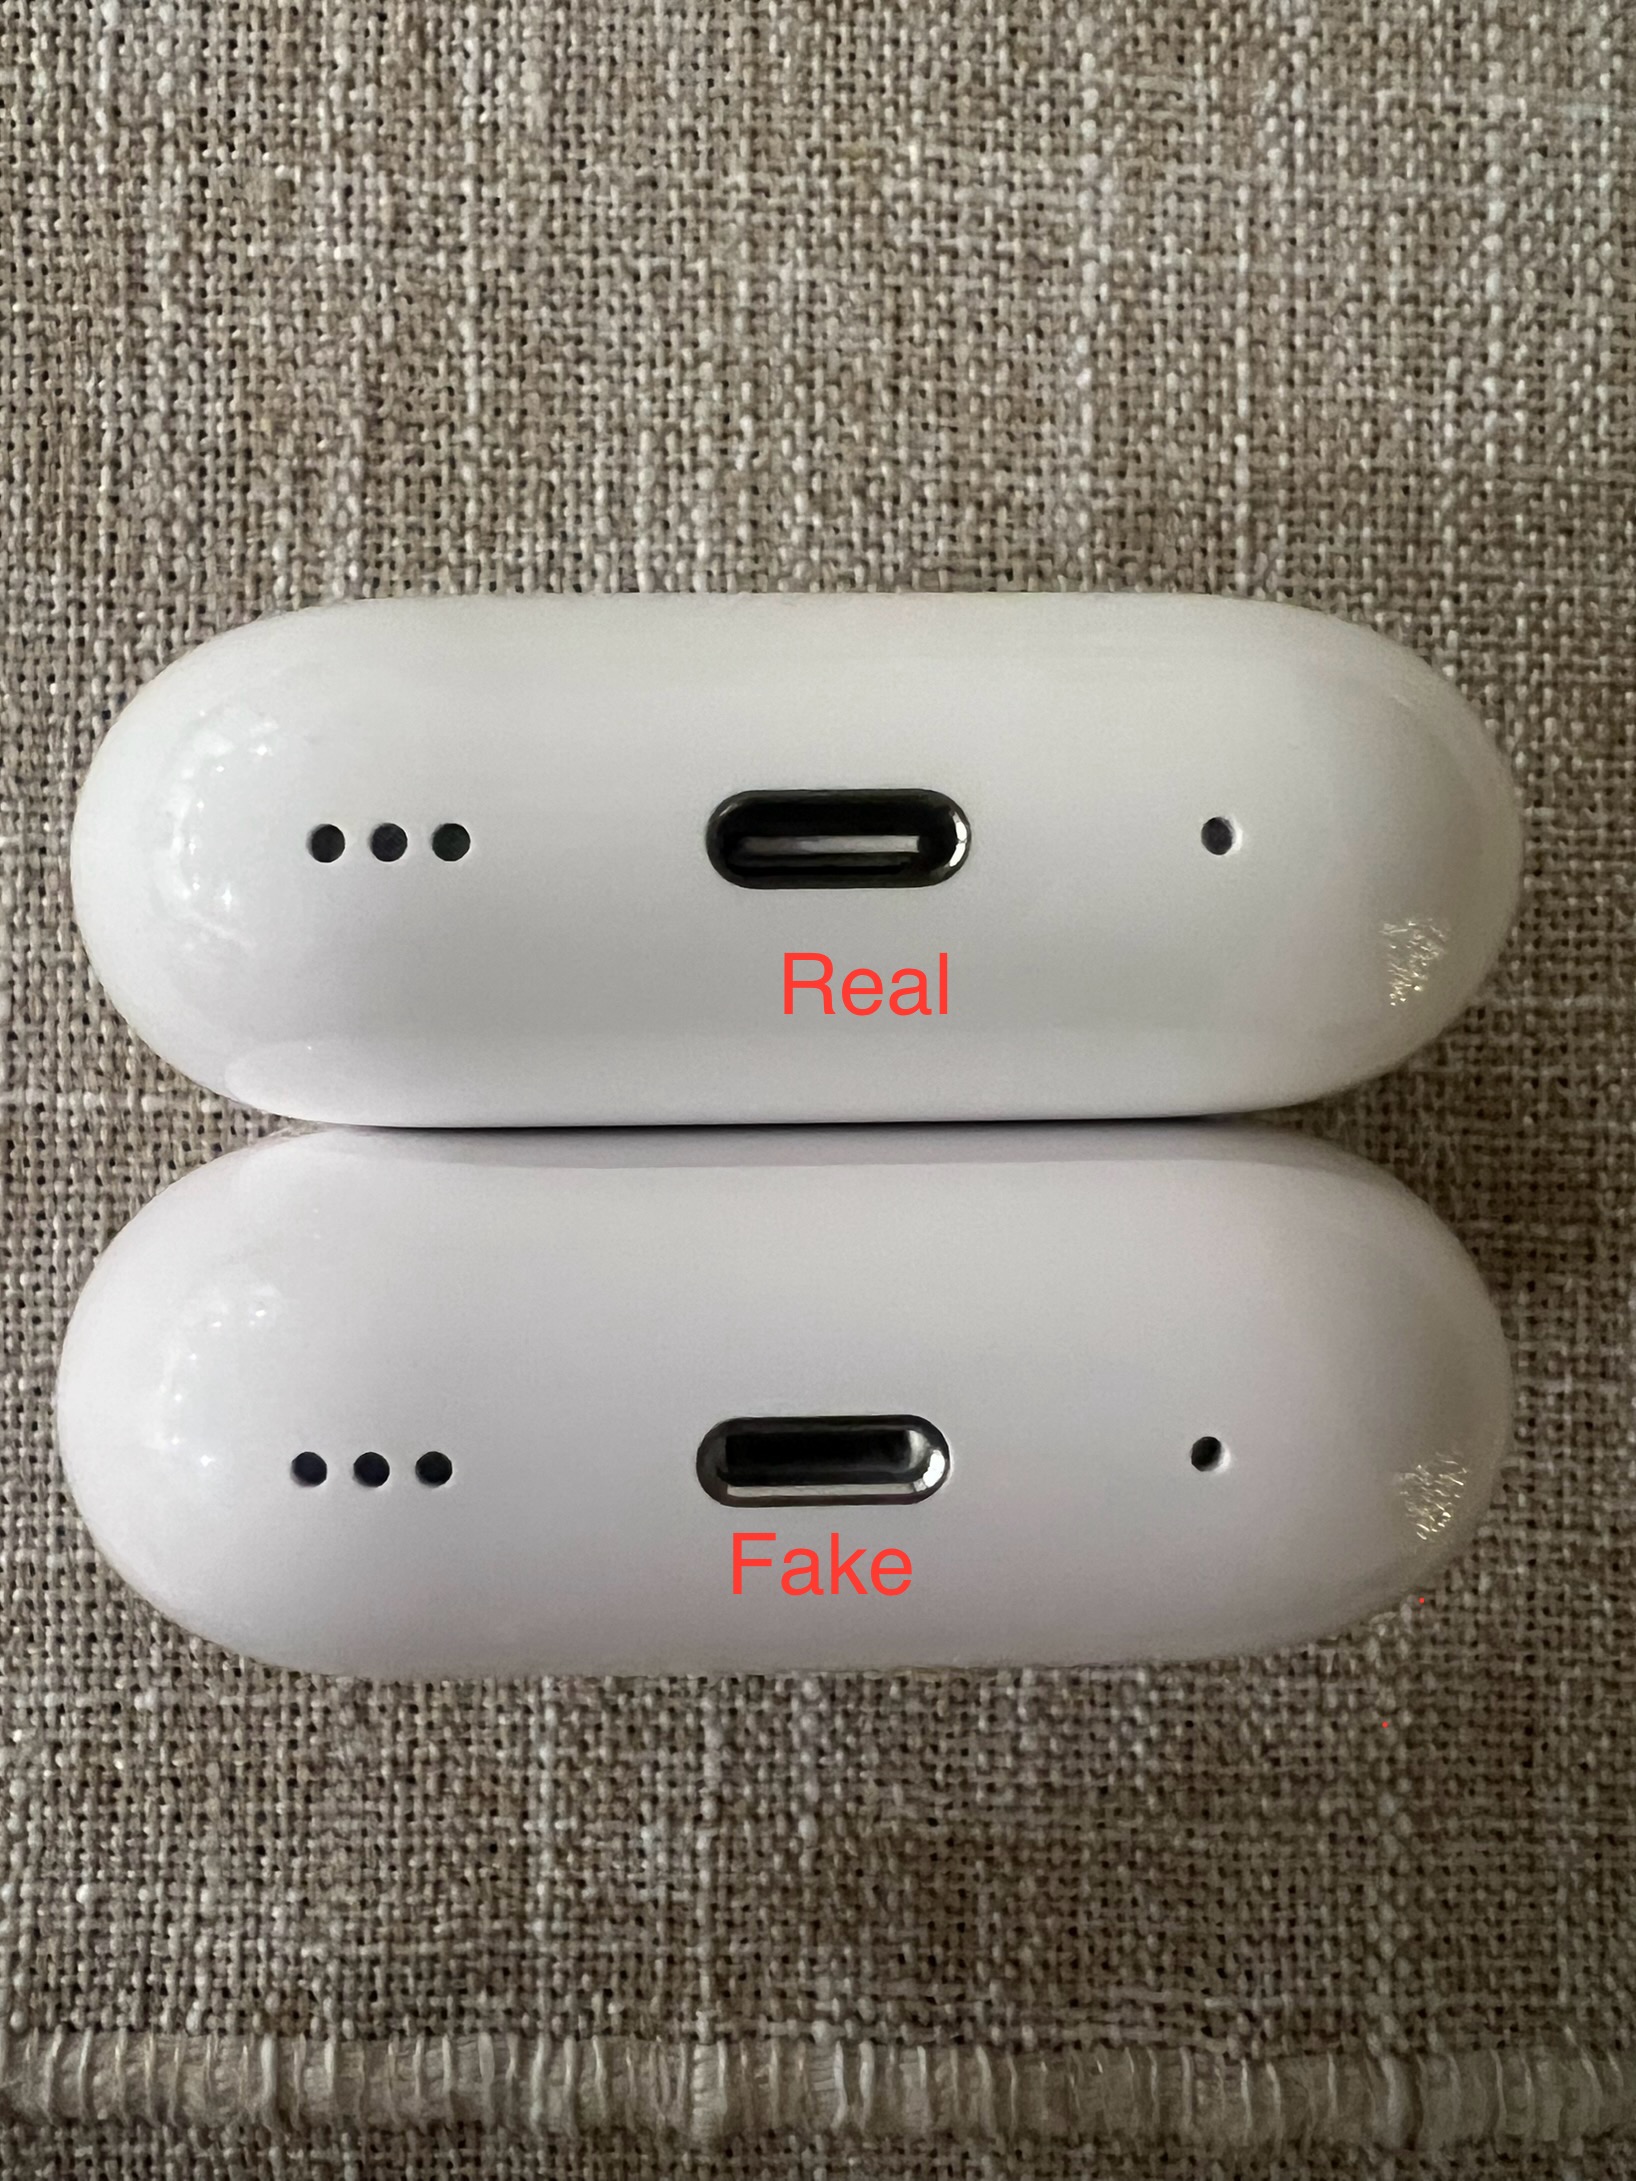 Can the AirPods Pro 2 have a copyright da… - Apple Community